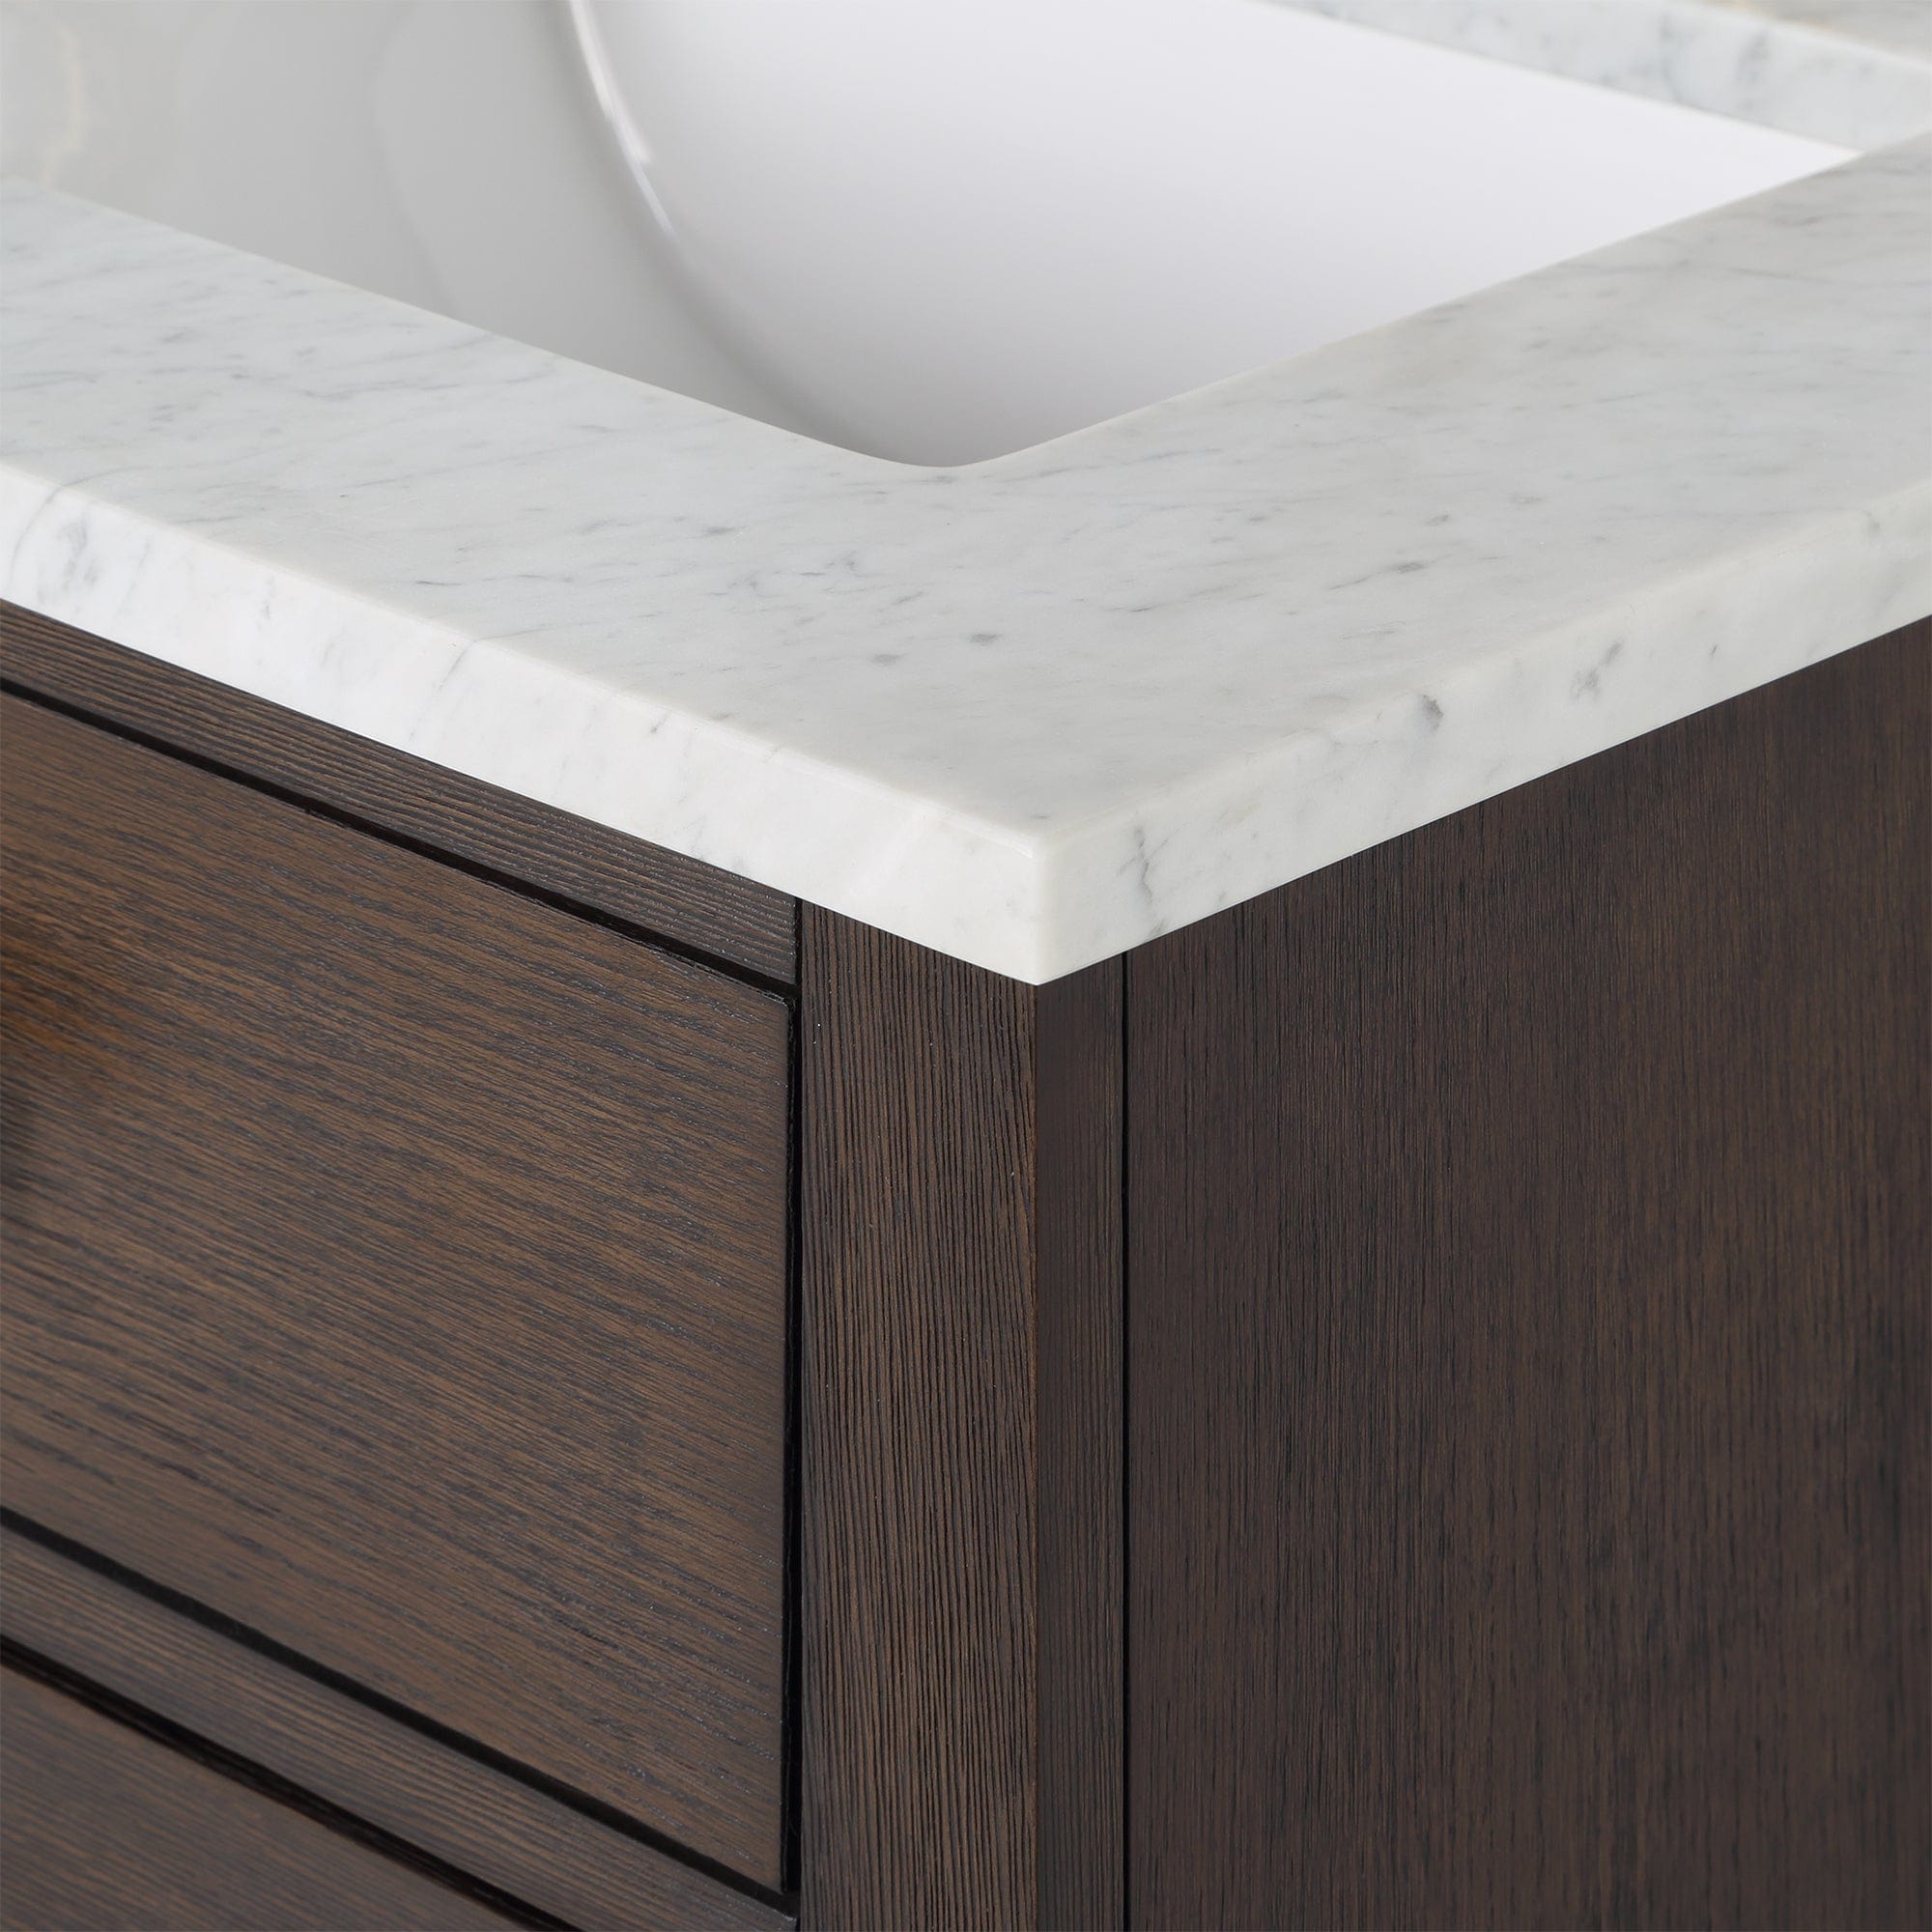 Chestnut 60 In. Double Sink Carrara White Marble Countertop Vanity In Brown Oak with Grooseneck Faucets - Molaix732030764828CH60CW06BK-000BL1406